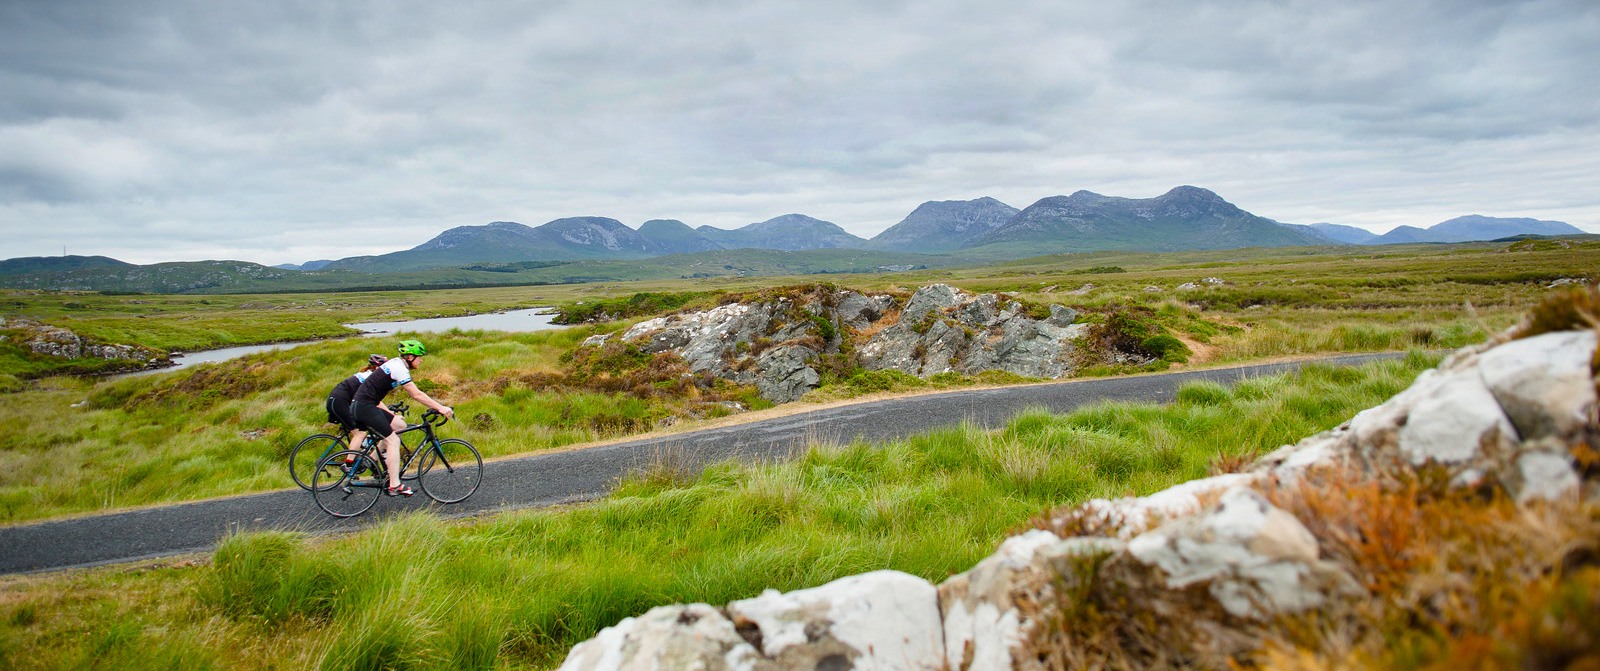 Ride through the rolling, green Mayo countryside